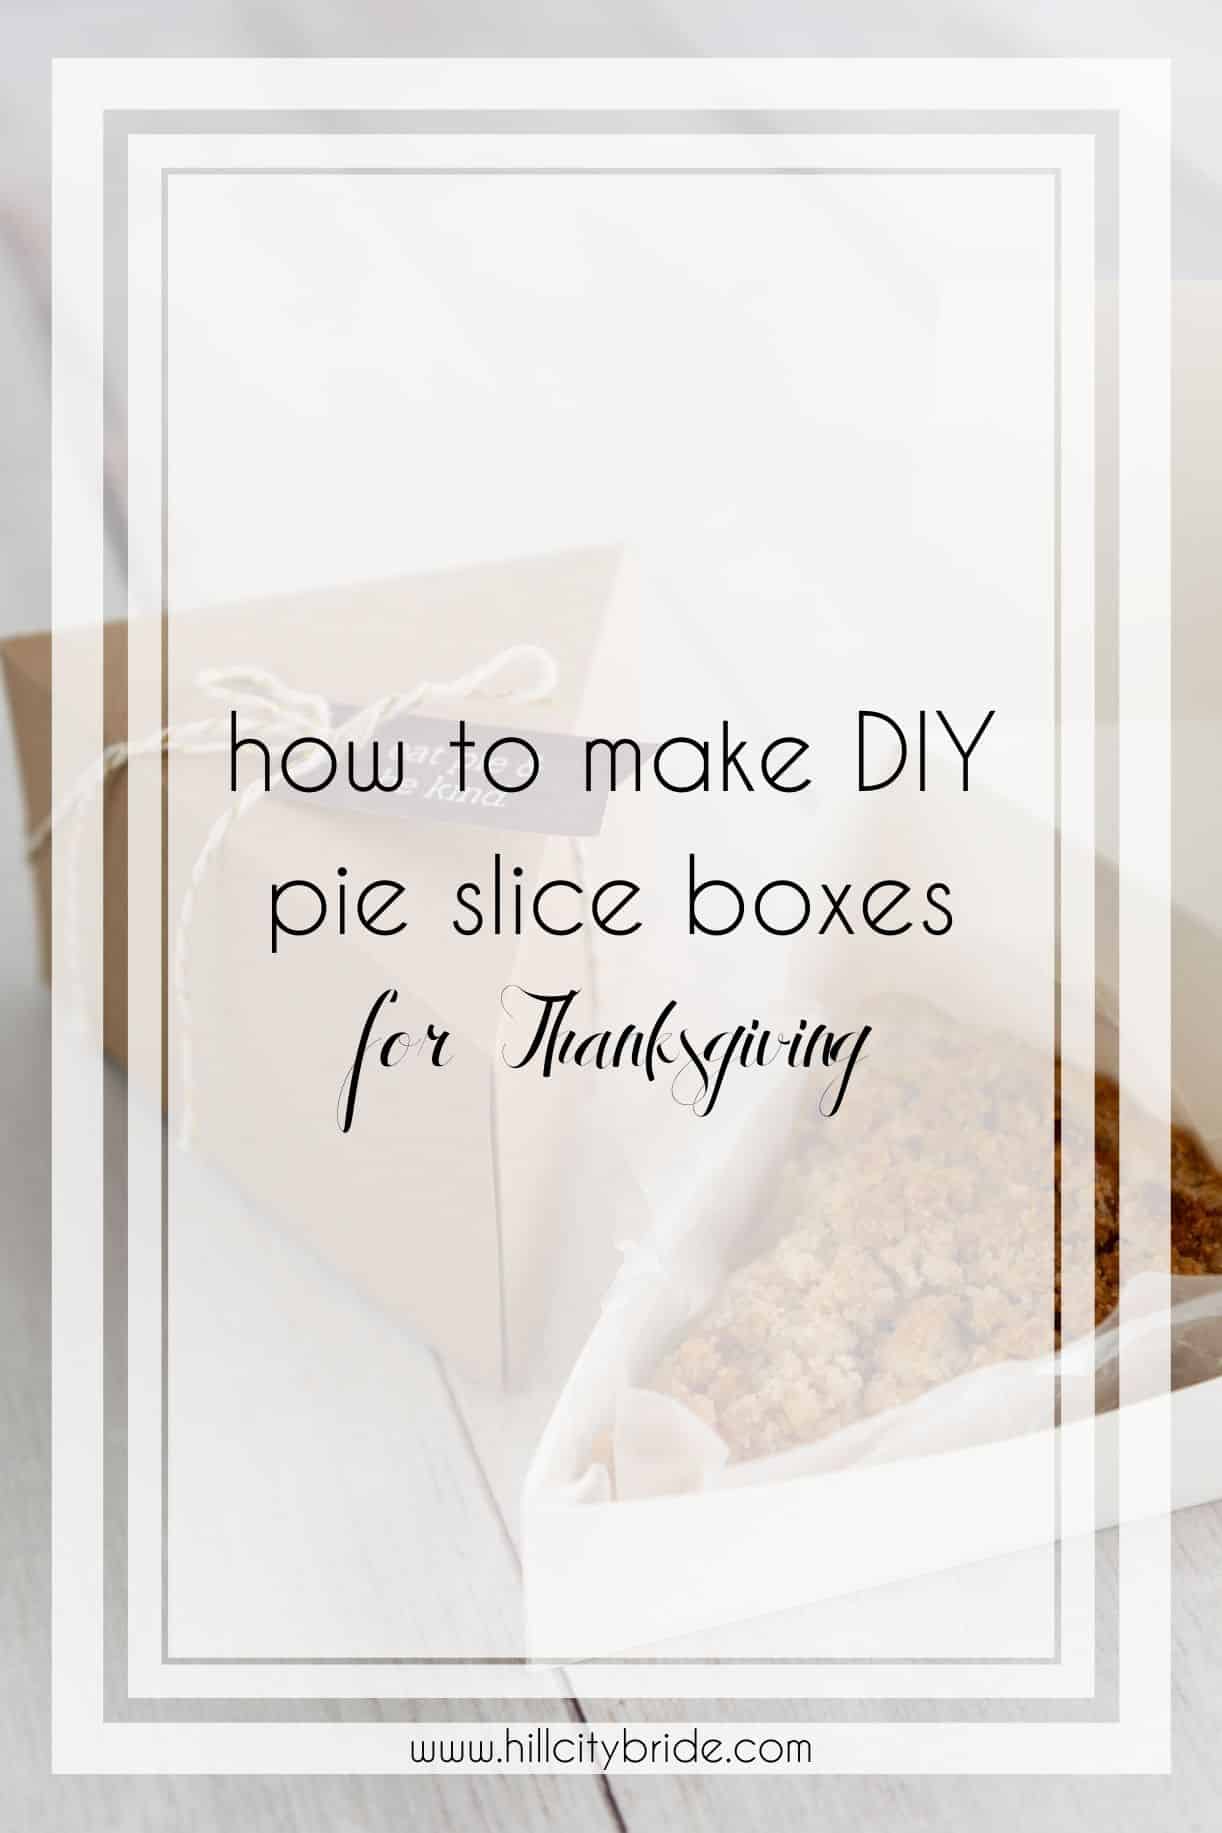 How to Make Easy DIY Individual Pie Slice Boxes for Thanksgiving Treats